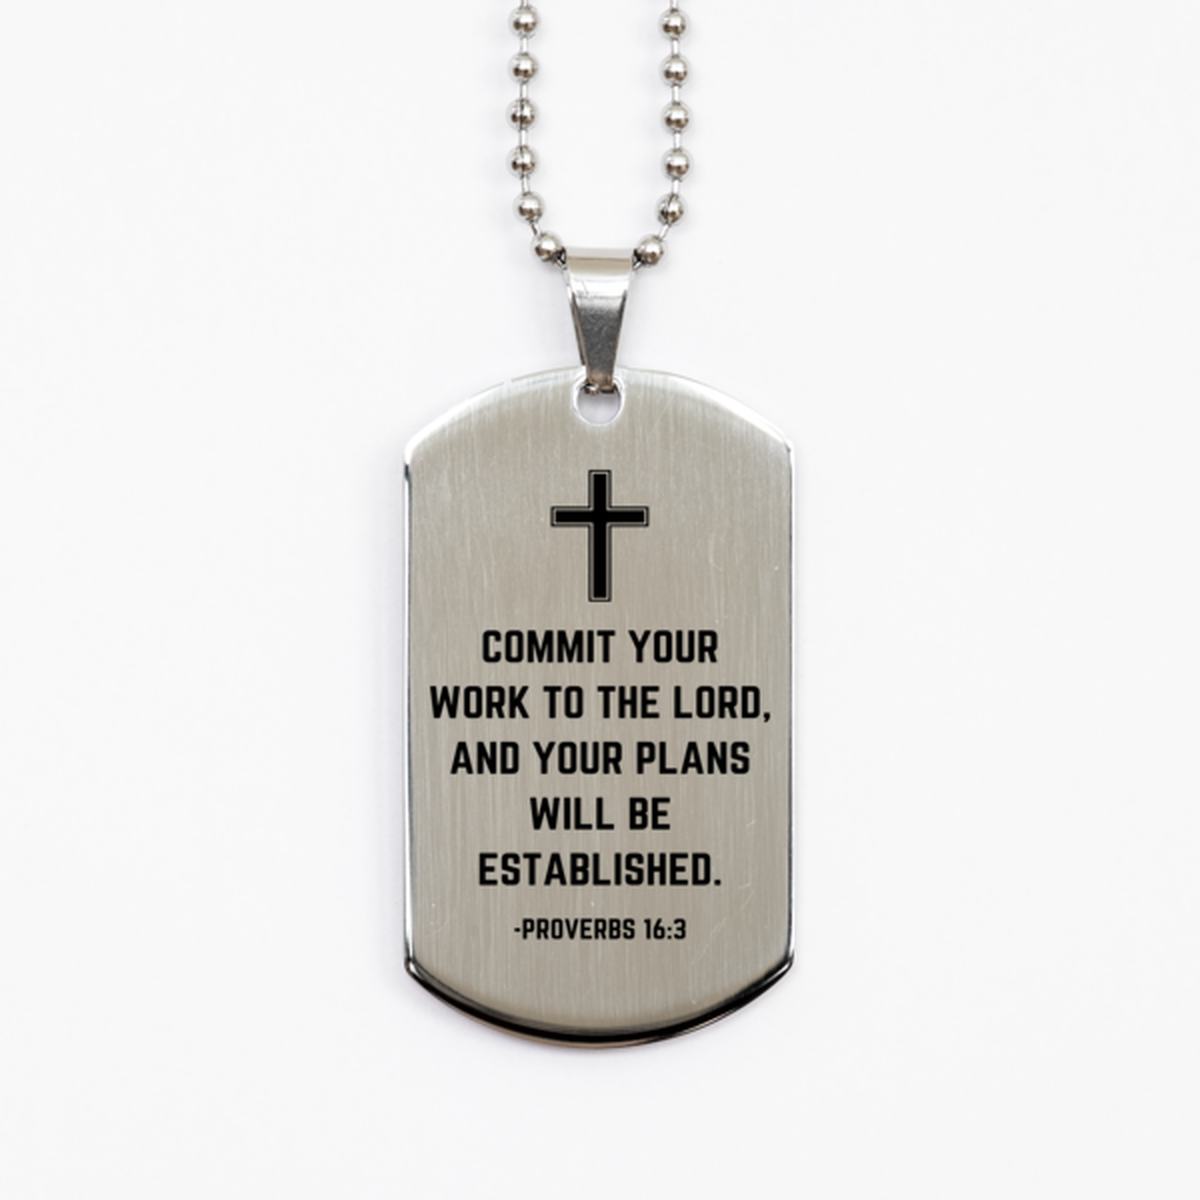 Baptism Gifts For Teenage Boys Girls, Christian Bible Verse Silver Dog Tag, Commit your work to the Lord, Confirmation Gifts, Bible Verse Necklace for Son, Godson, Grandson, Nephew